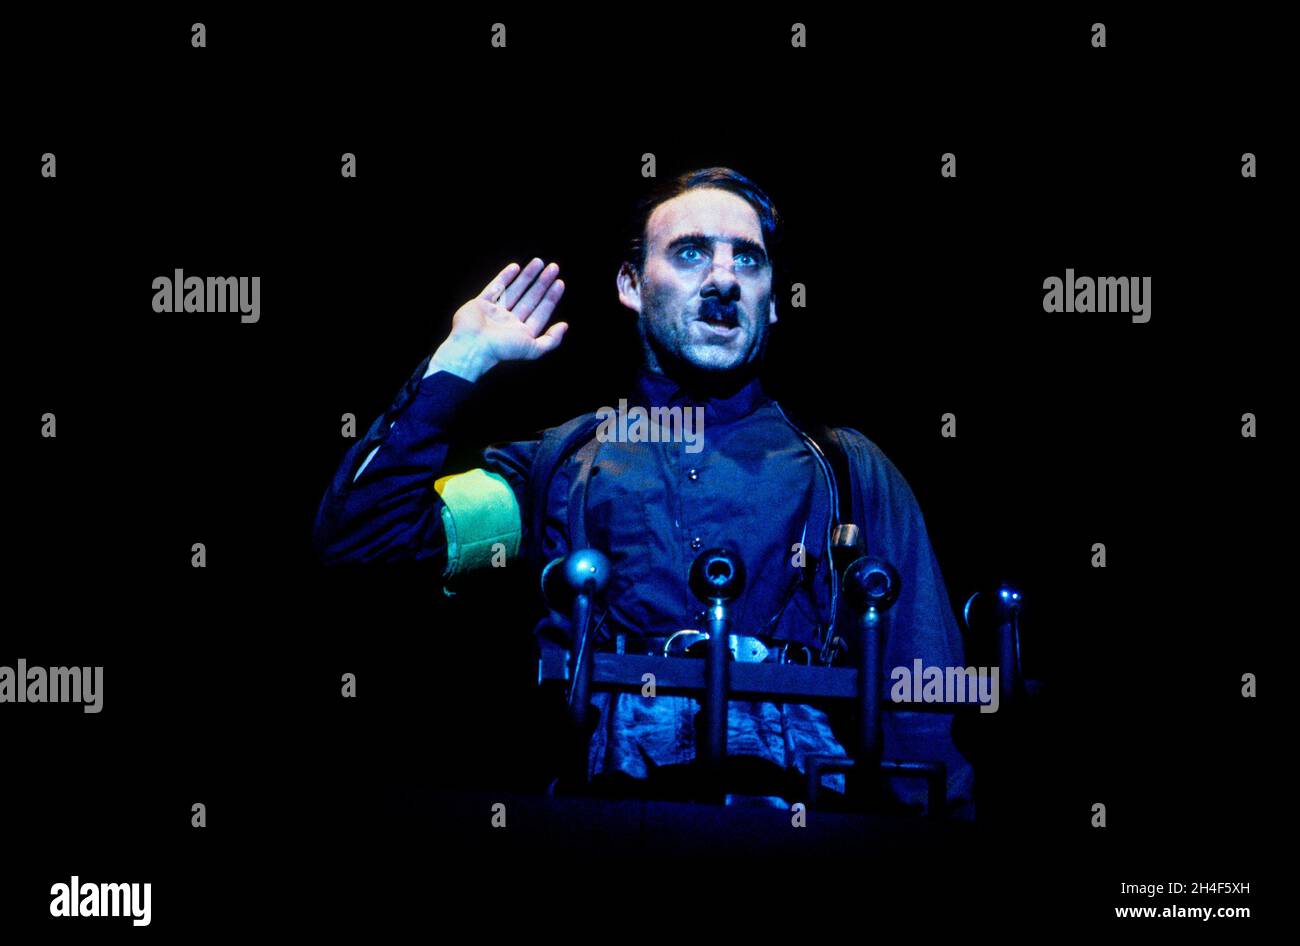 Antony Sher (Arturo Ui) in THE RESISTIBLE RISE OF ARTURO UI by Bertolt Brecht at the Olivier Theatre, National Theatre (NT), London SE1  08/08/1991  translated by Ranjit Bolt  design: Ultz  lighting: Paul Pyant  director: Di Trevis Stock Photo